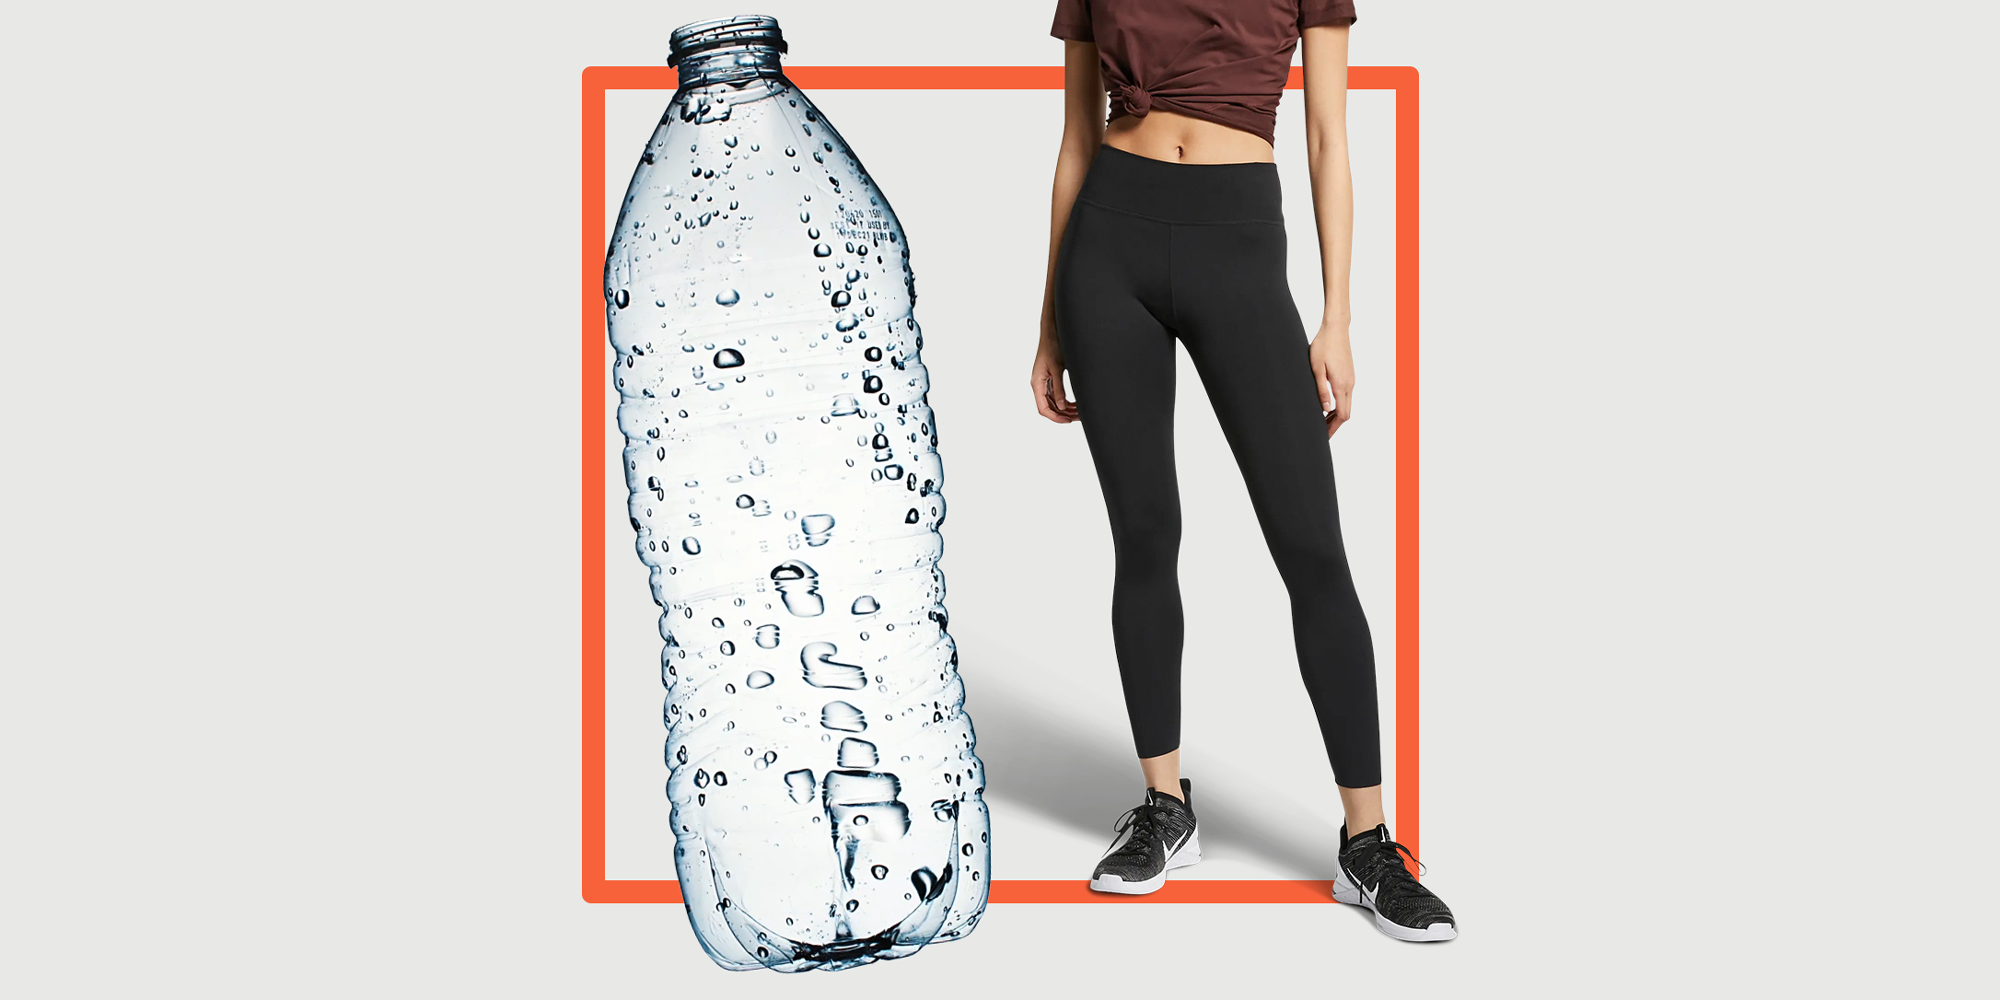 How A Plastic Water Bottle Gets Recycled Into A Pair Of Leggings